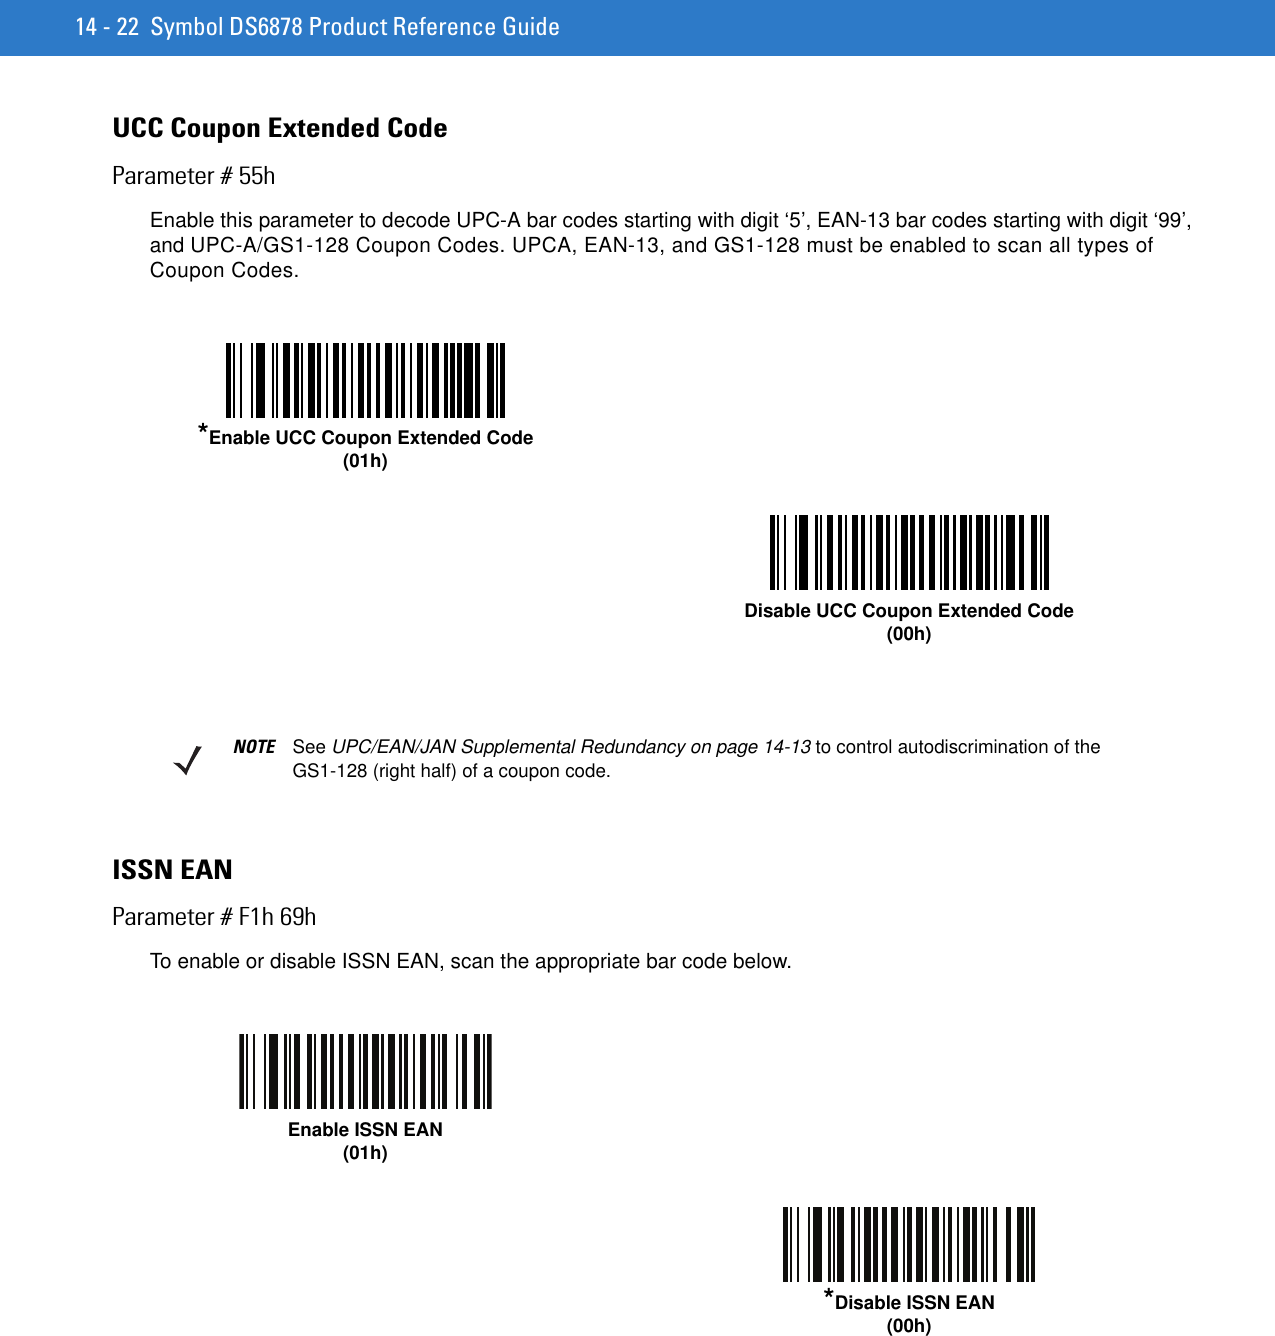 14 - 22 Symbol DS6878 Product Reference GuideUCC Coupon Extended CodeParameter # 55hEnable this parameter to decode UPC-A bar codes starting with digit ‘5’, EAN-13 bar codes starting with digit ‘99’, and UPC-A/GS1-128 Coupon Codes. UPCA, EAN-13, and GS1-128 must be enabled to scan all types of Coupon Codes. ISSN EANParameter # F1h 69hTo enable or disable ISSN EAN, scan the appropriate bar code below.*Enable UCC Coupon Extended Code(01h)Disable UCC Coupon Extended Code(00h)NOTE See UPC/EAN/JAN Supplemental Redundancy on page 14-13 to control autodiscrimination of the GS1-128 (right half) of a coupon code. Enable ISSN EAN (01h)*Disable ISSN EAN (00h)